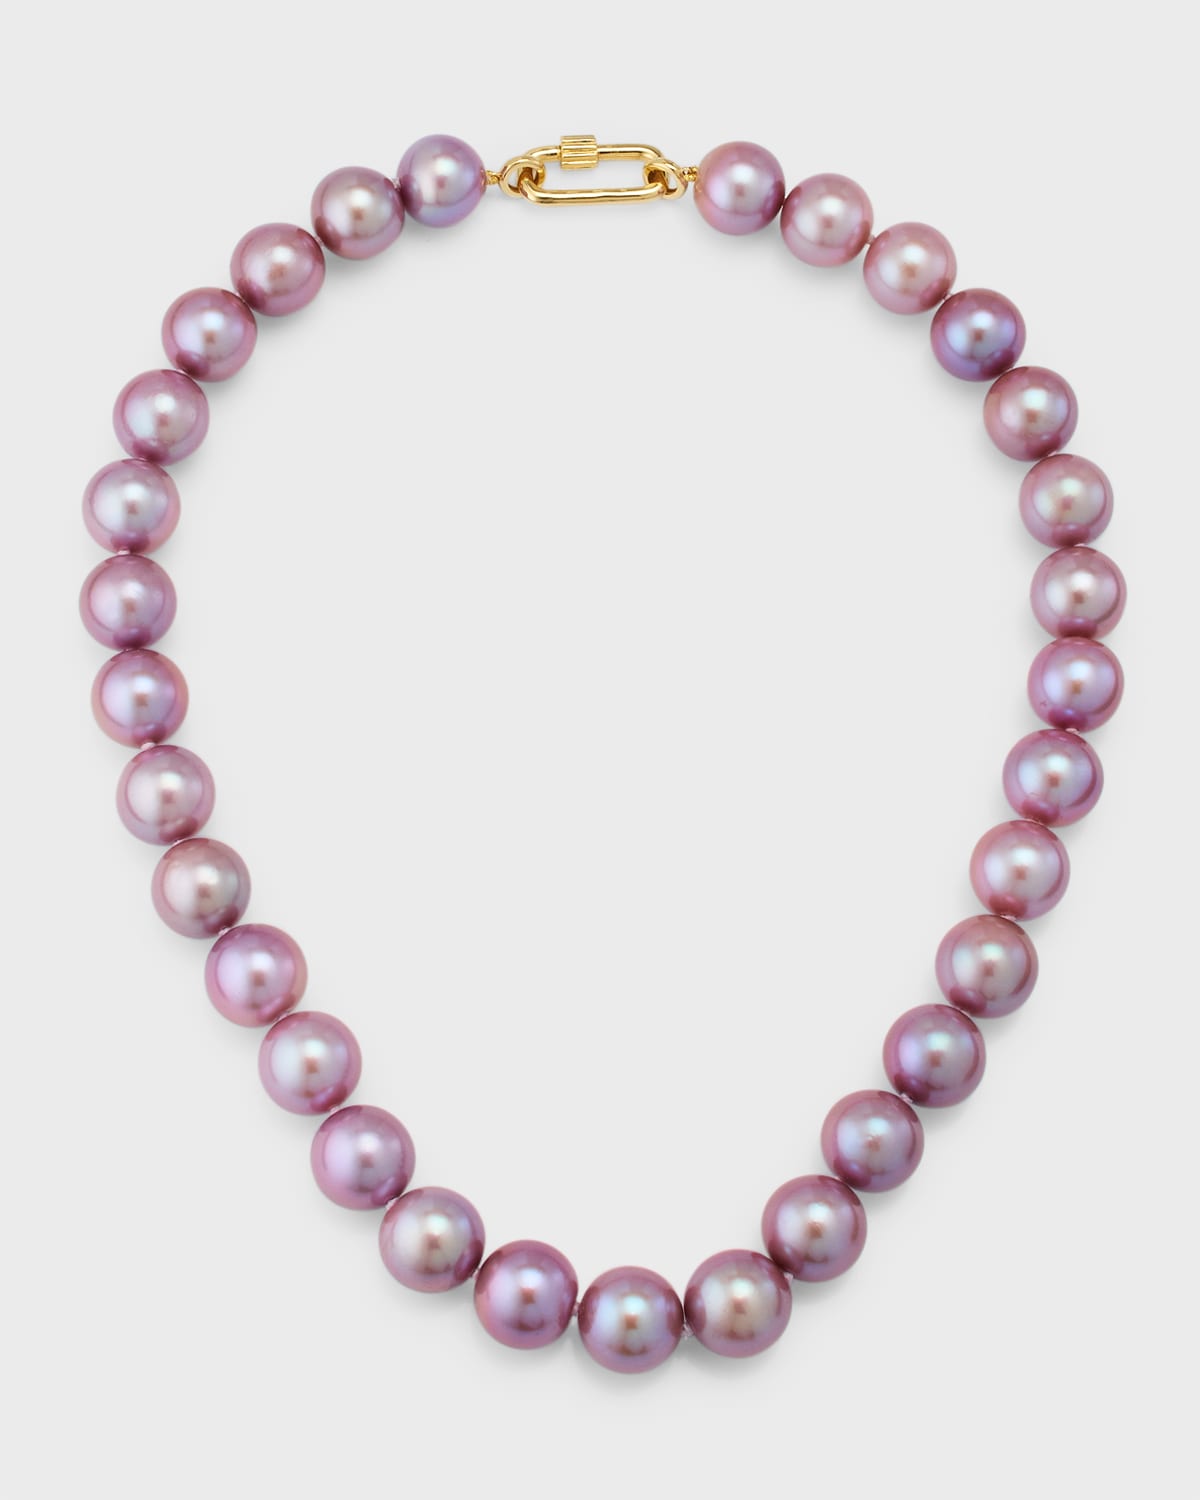 Pearls By Shari 18k Yellow Gold Pink Kasumiga Pearl Necklace